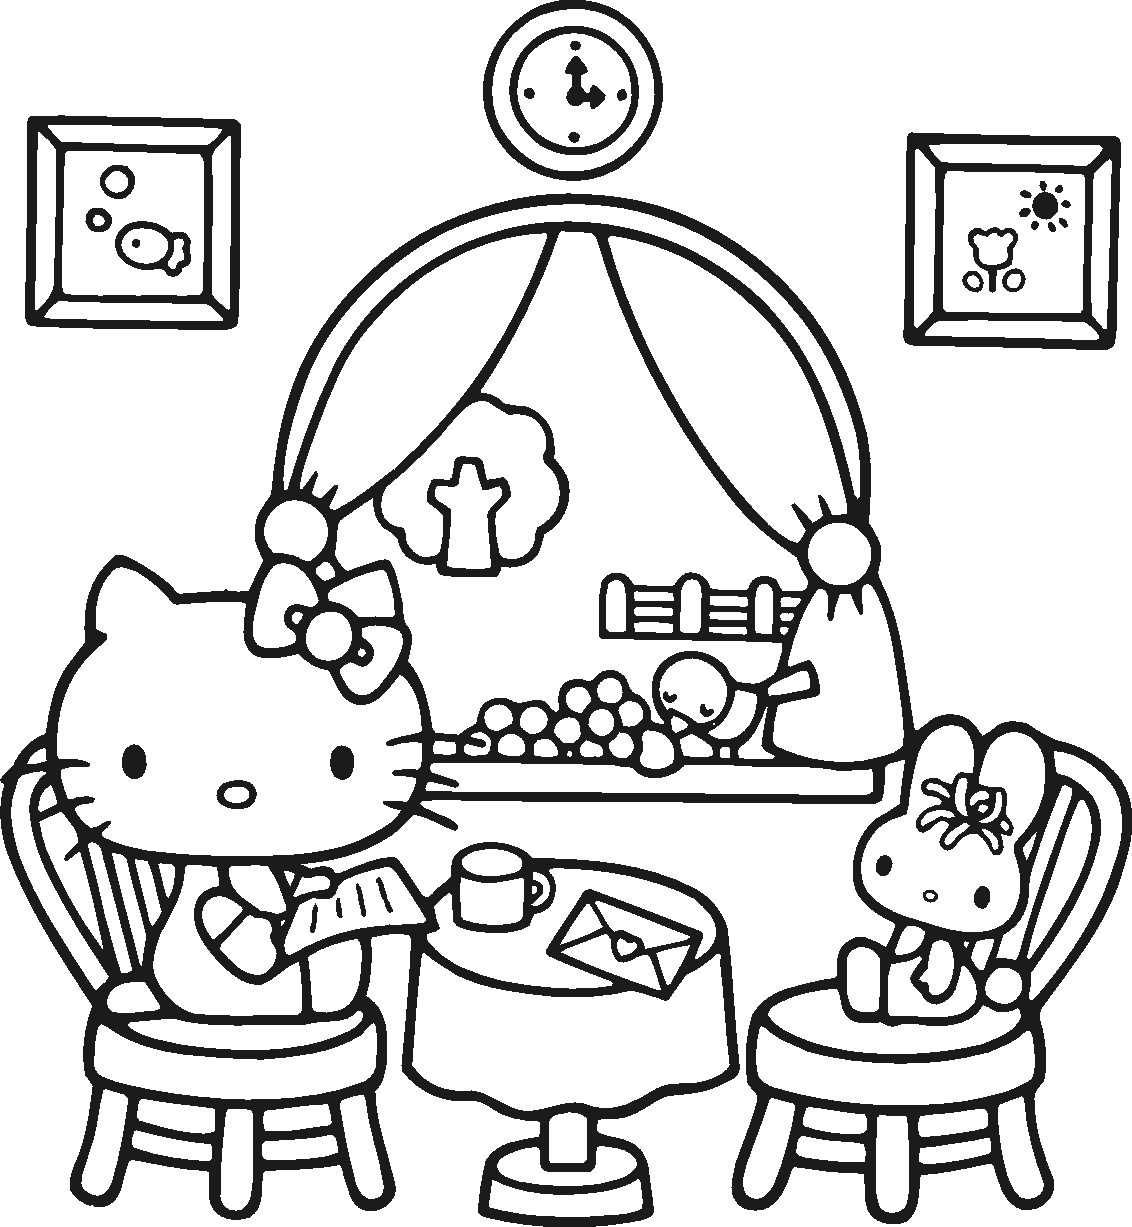 coloring book hello kitty hello kitty coloring pages lets coloring hello coloring kitty book 